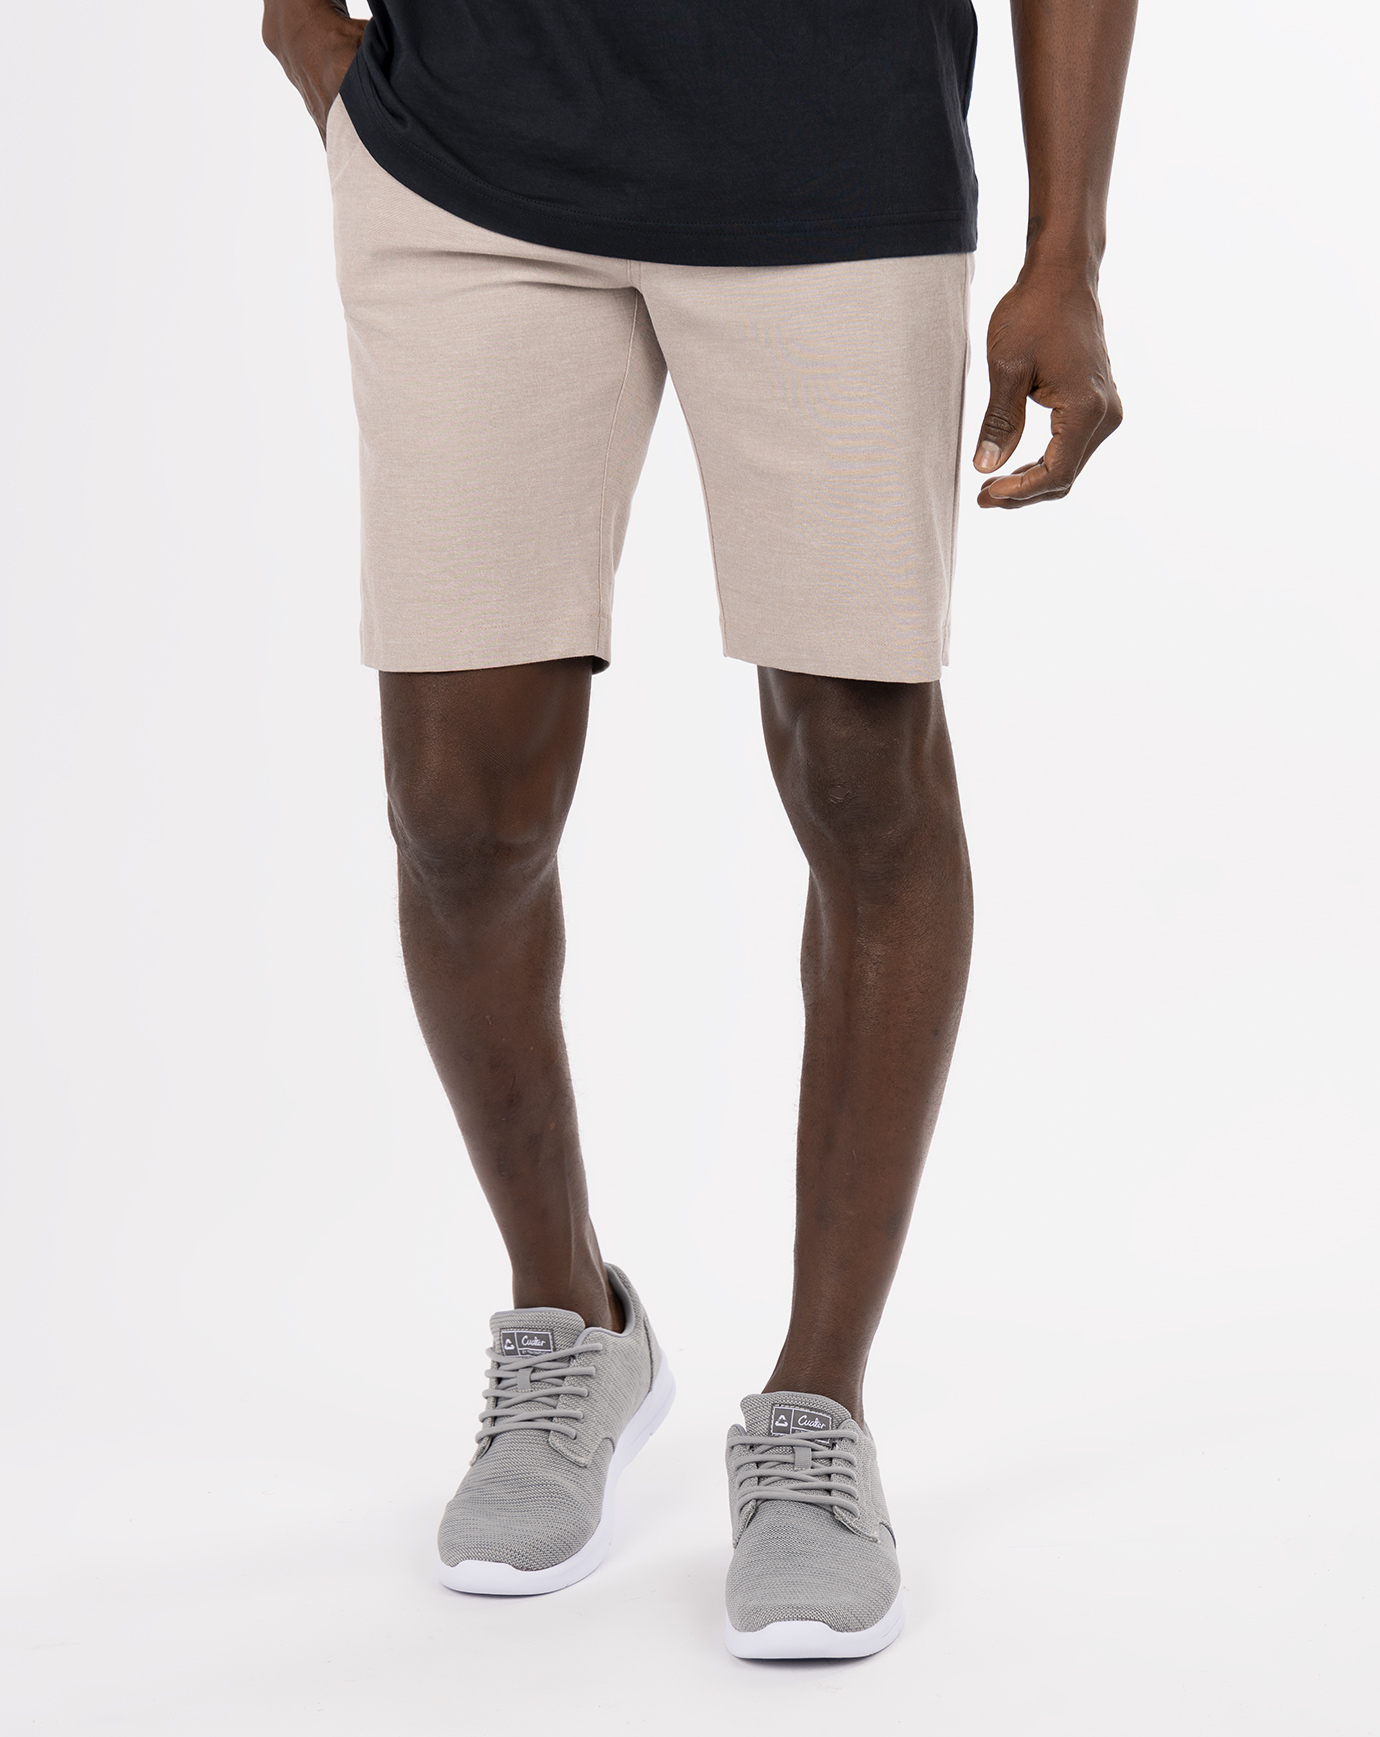 Tailored shorts: how to style them and the best pairs to add to cart now